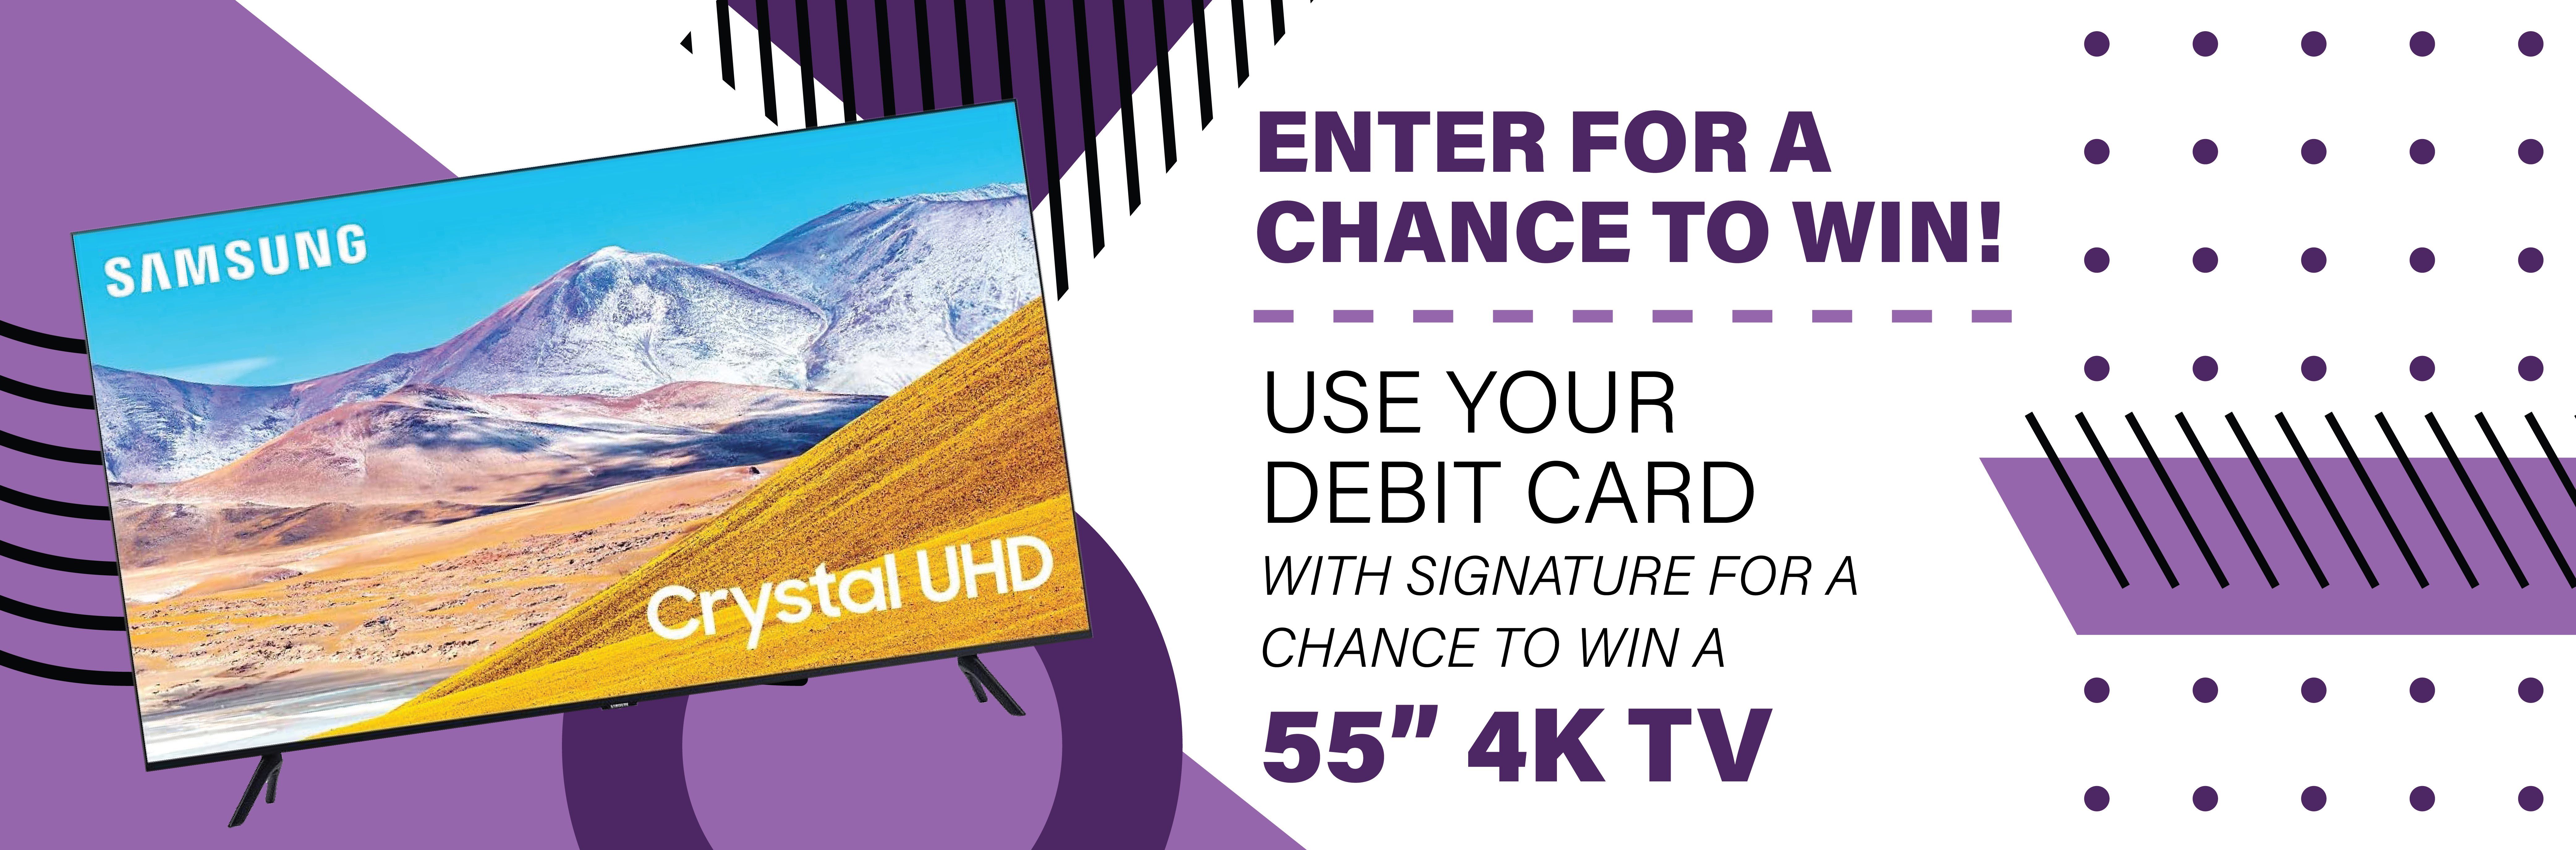 Enter for a chance to win! Use your debit card with signature for a chance to win a 55" 4K TV